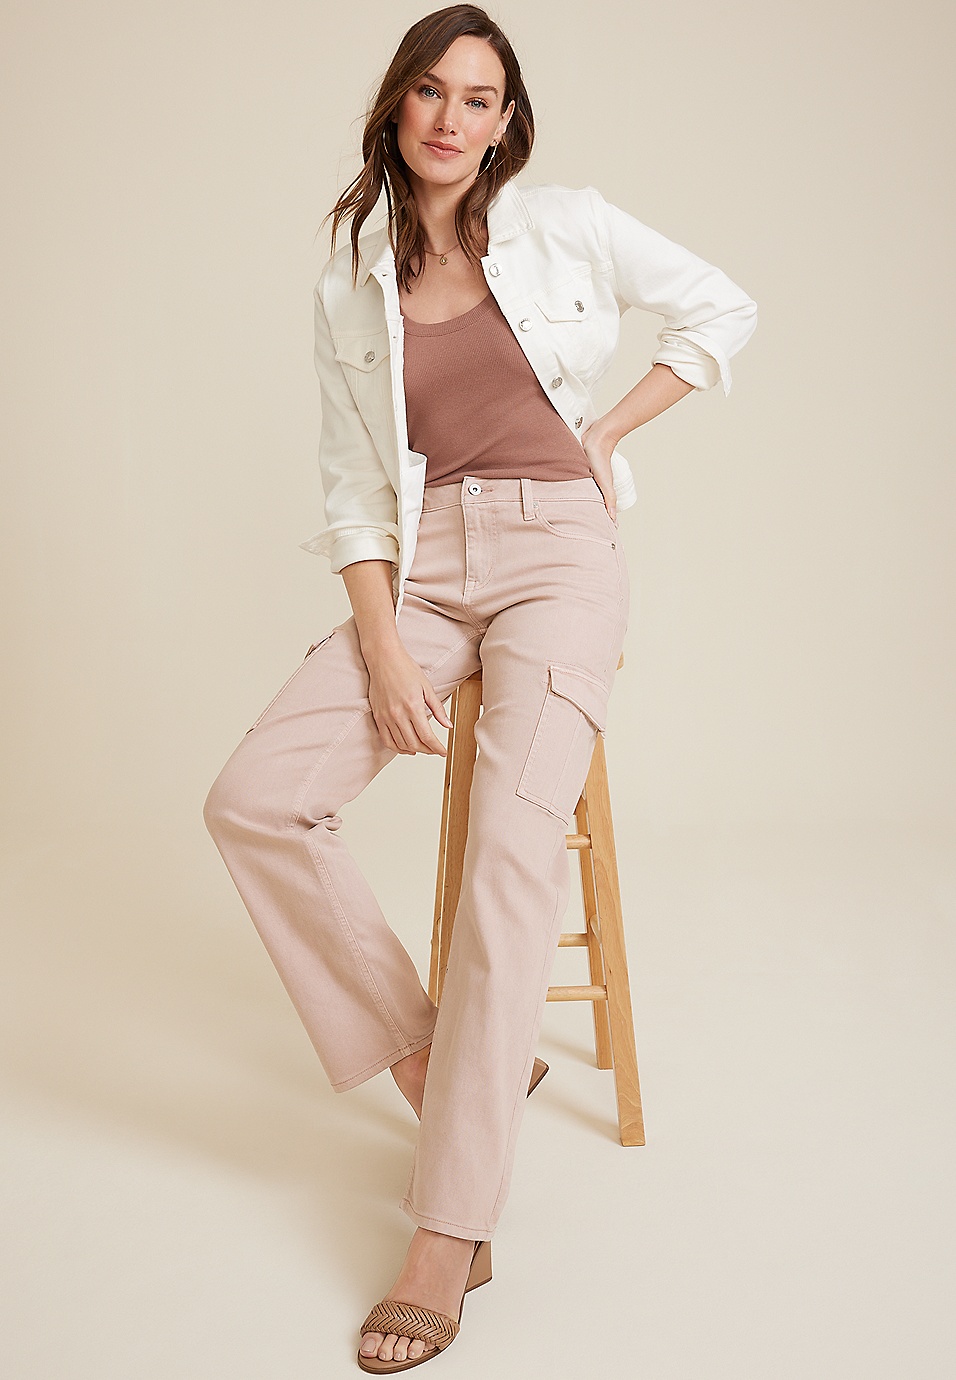 Women's Relaxed Fit Straight Leg Cargo Pants